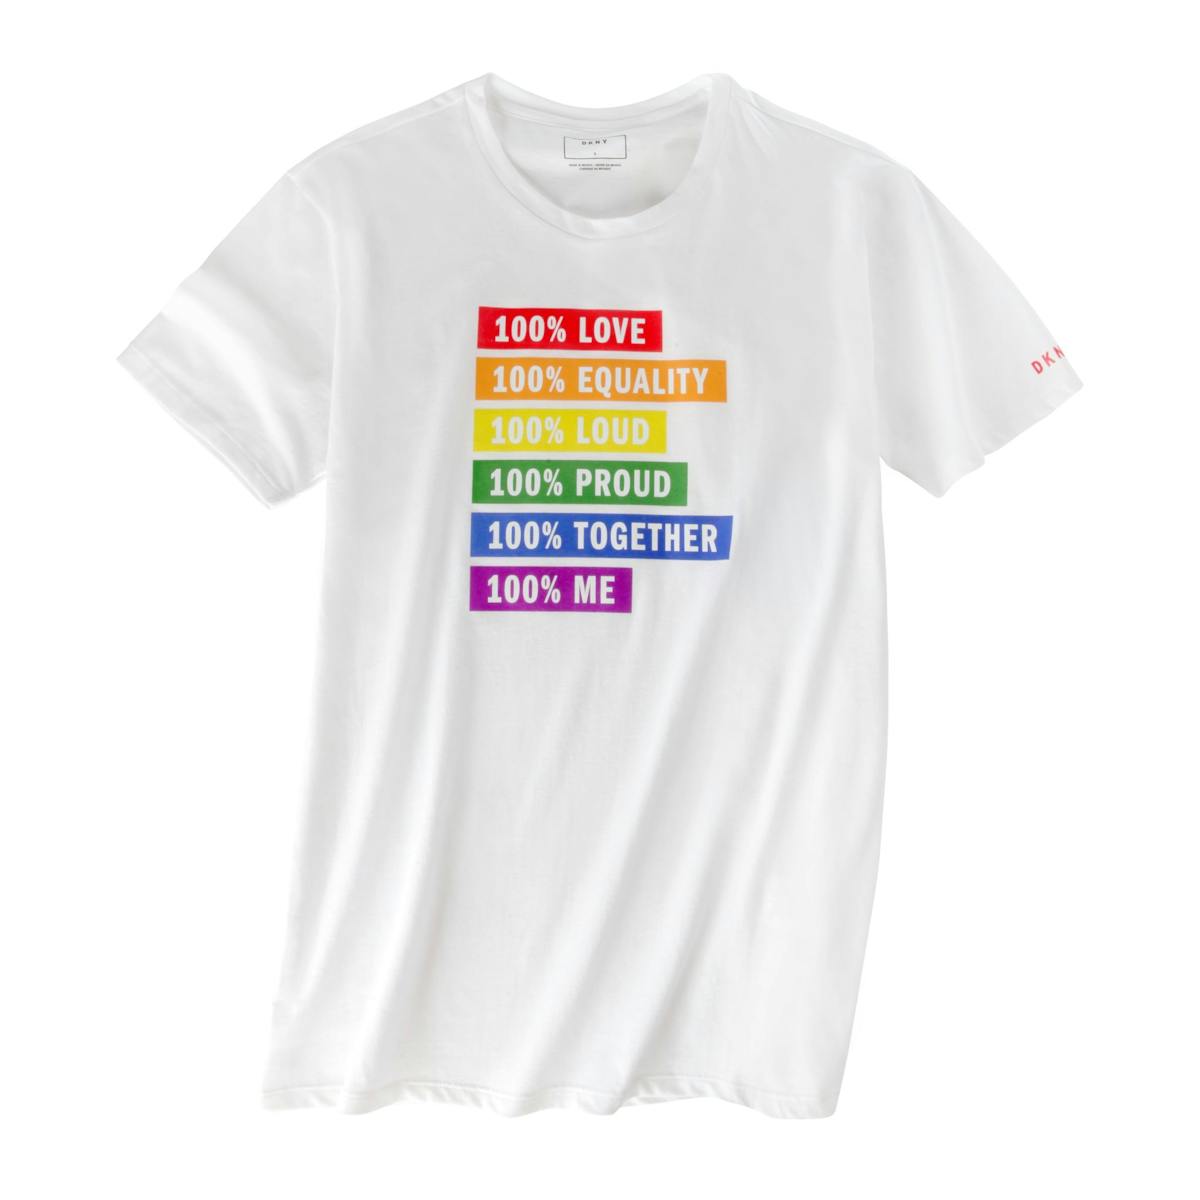 Best Tshirts for Pride Rainbow shirts supporting LGBT charities